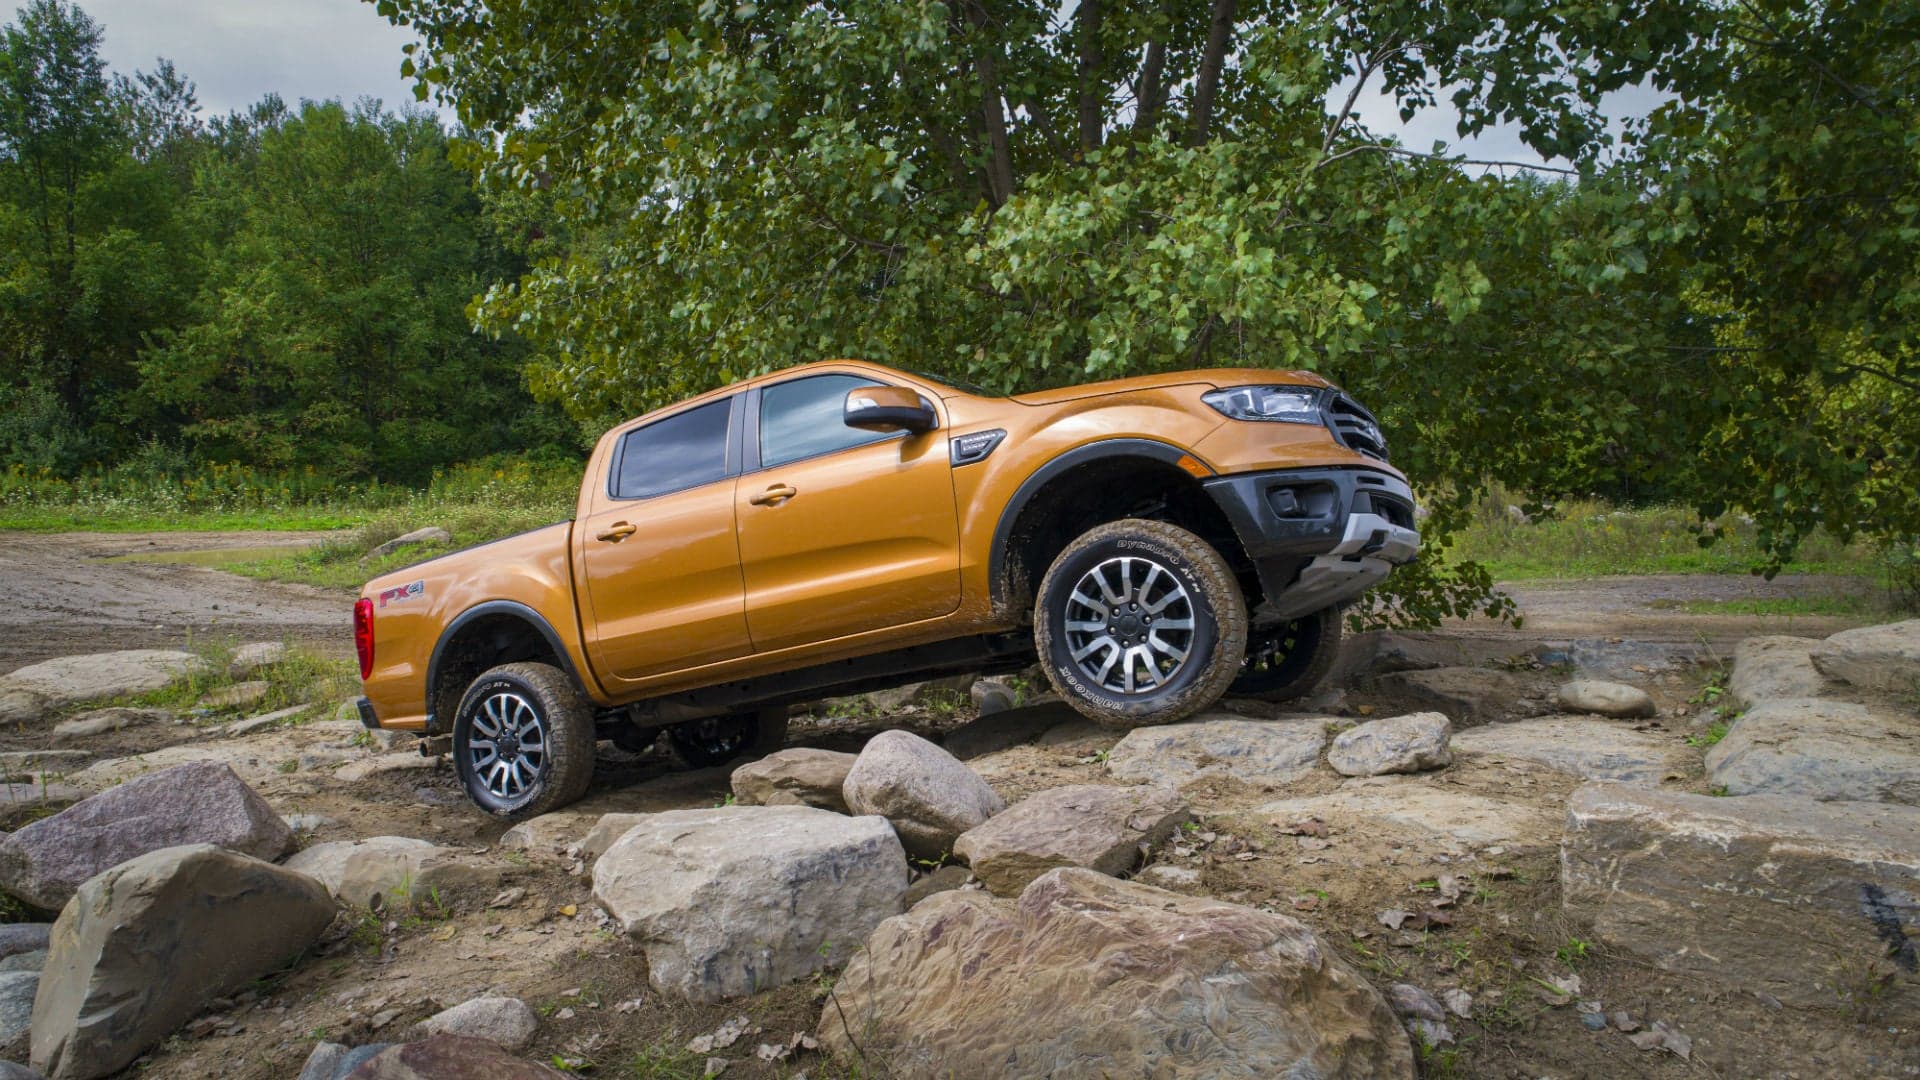 2020 Ford Ranger ‘Breadcrumbs’ Feature Keeps You From Getting Lost While Off-Roading